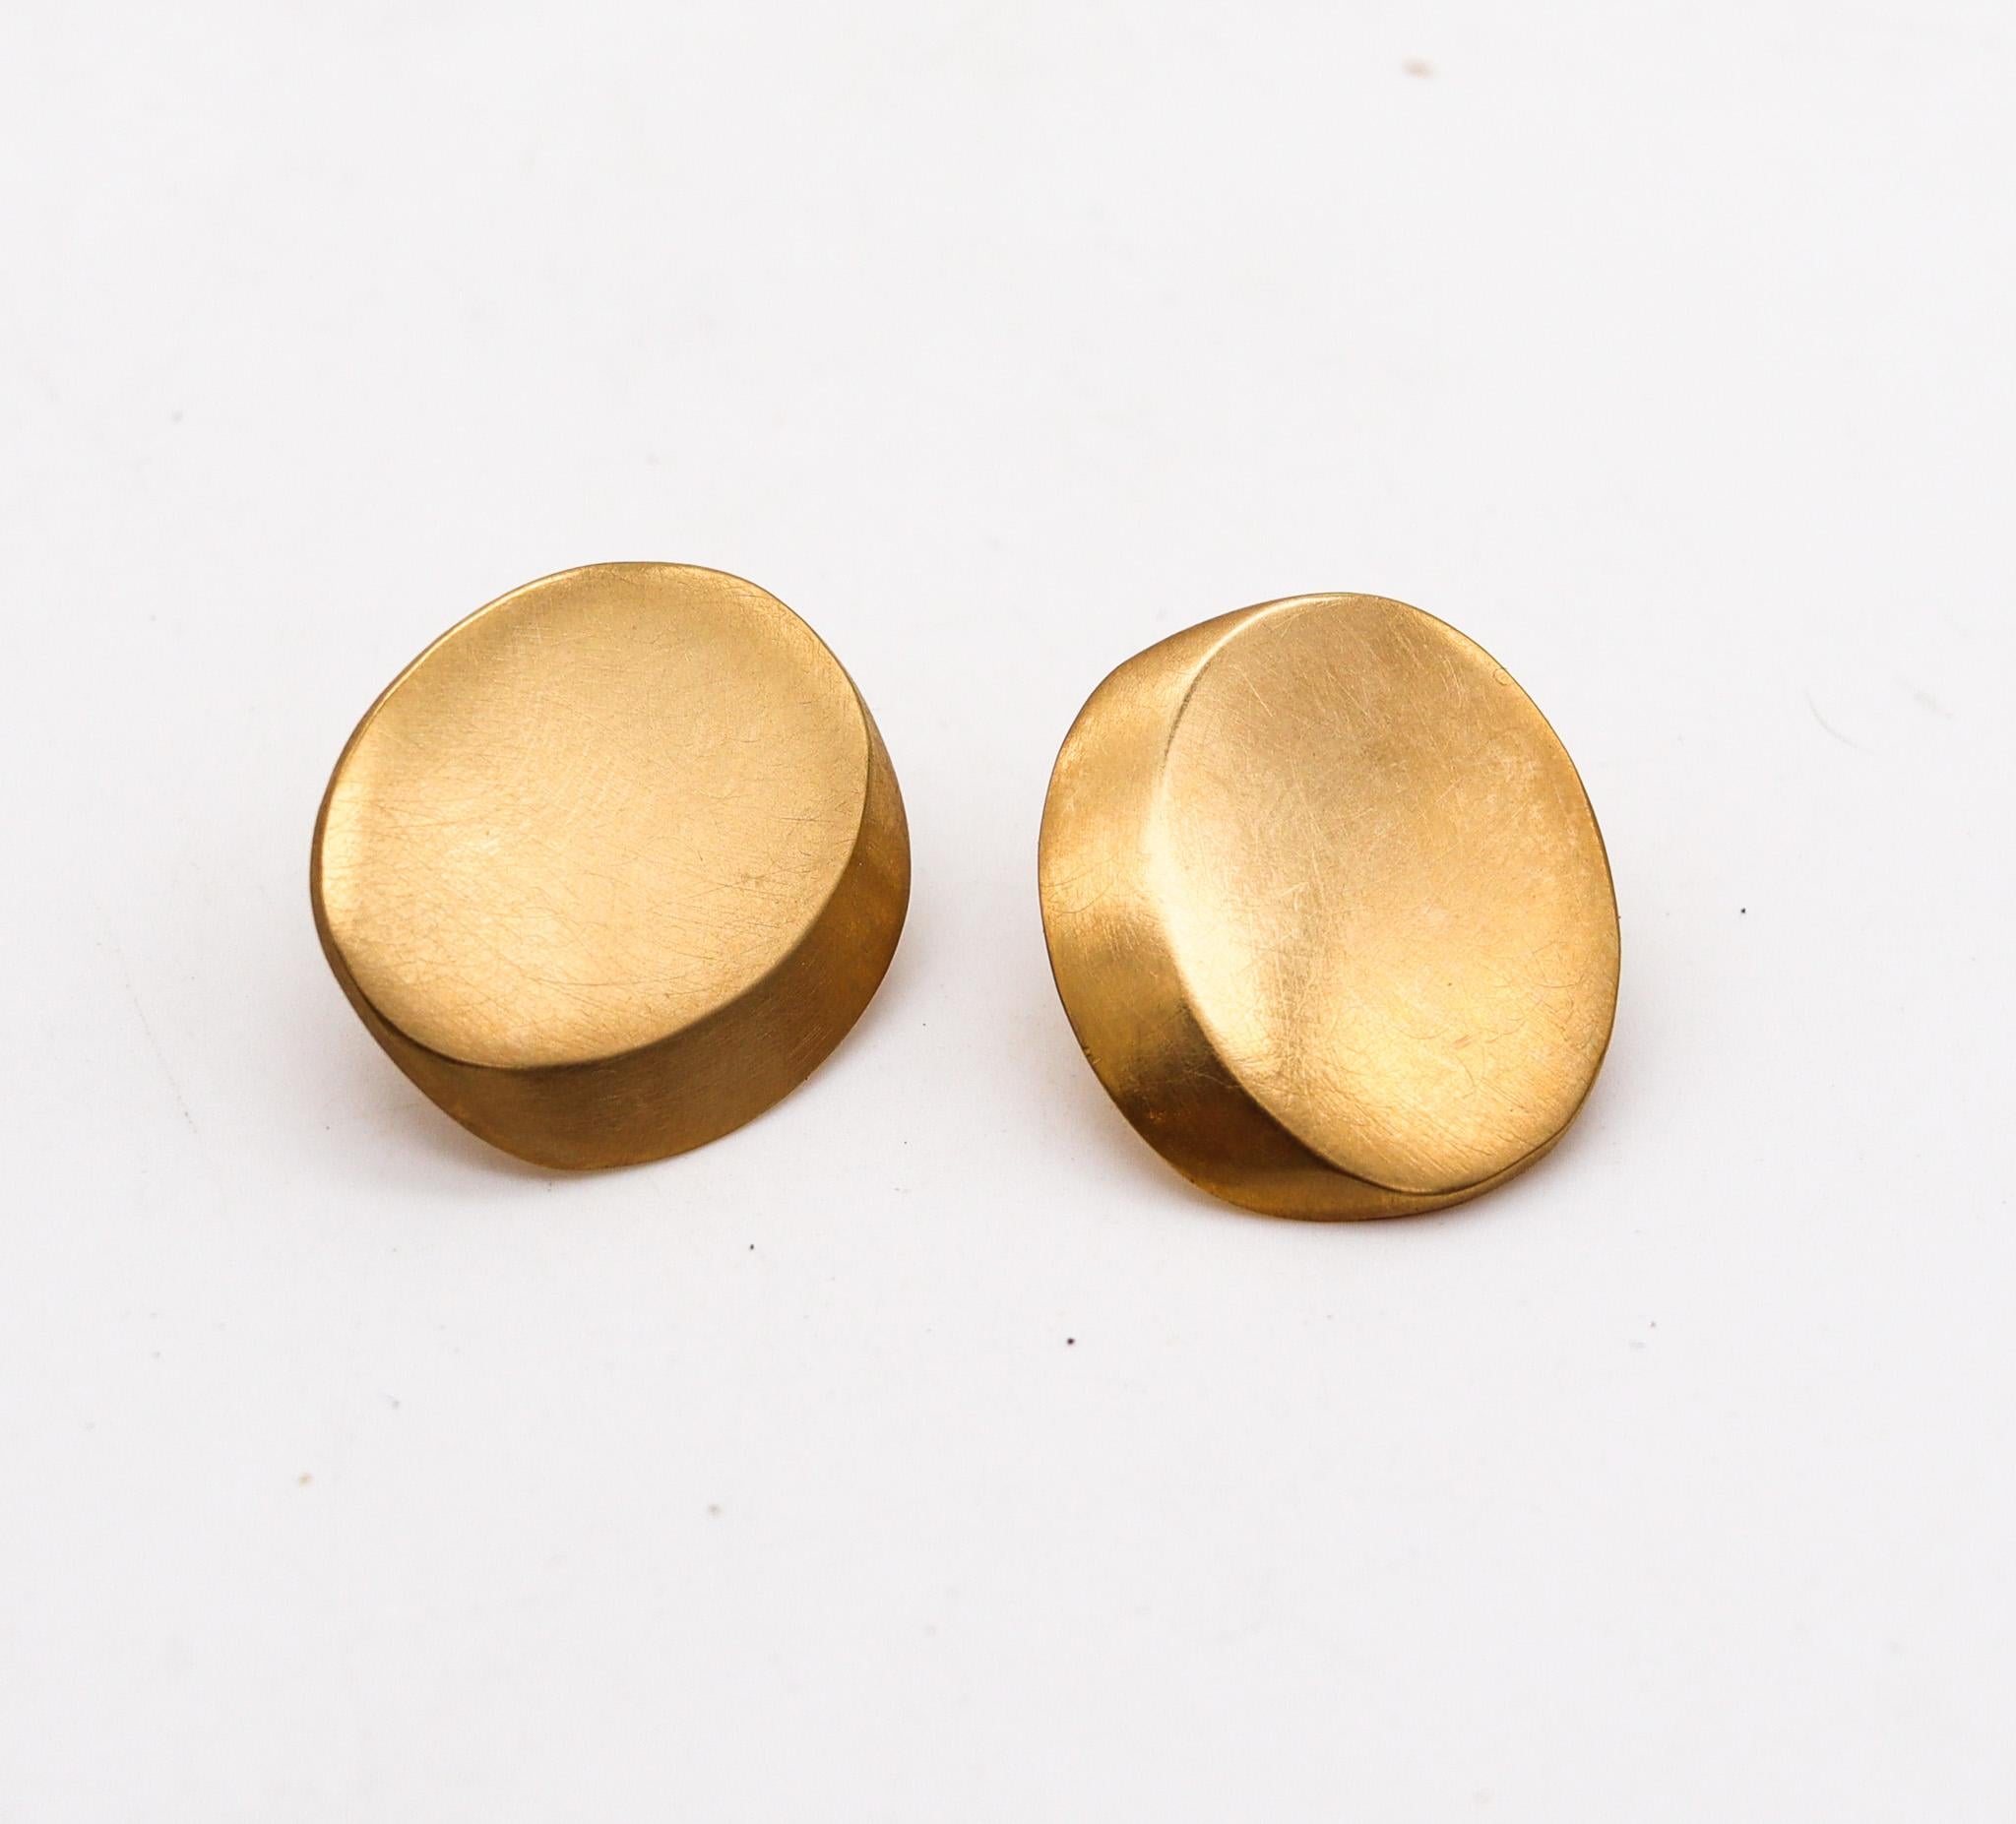 Claude Chavent Paris Geometric Oval Earrings In Sterling With 18Kt Gold Vermeil

Trompe L'oeil earrings by Françoise et Claude Chavent (1947-)

Gorgeous vintage earrings, created in Montpellier France by the artists and goldsmiths Francoise and